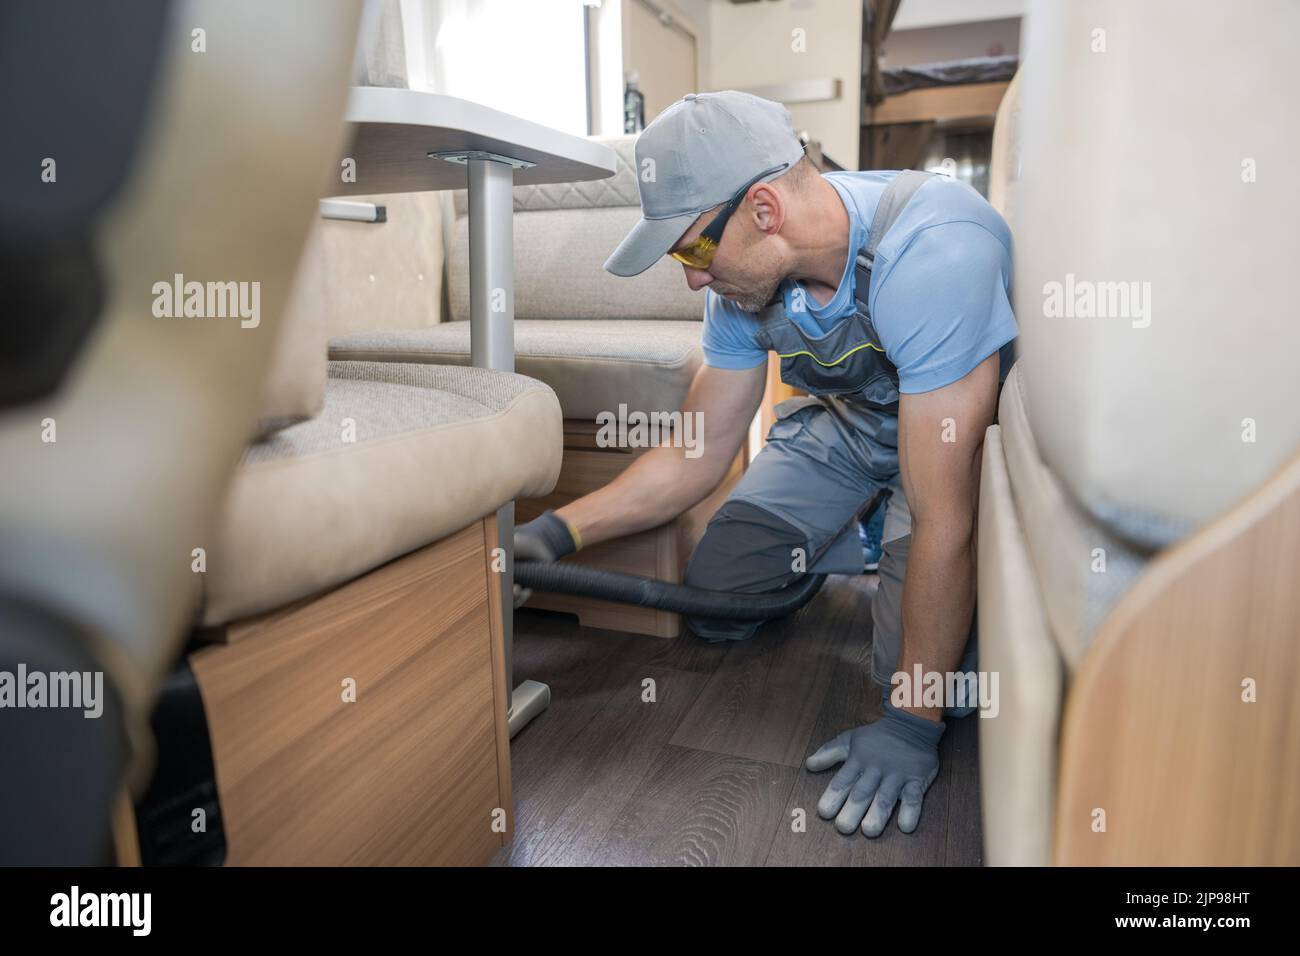 Recreational Vehicle Year-Round Care and Maintenance Services. Caucasian Worker Carefully Vacuuming Floor Under the Beige Sofa in Modern RV. Interior Stock Photo